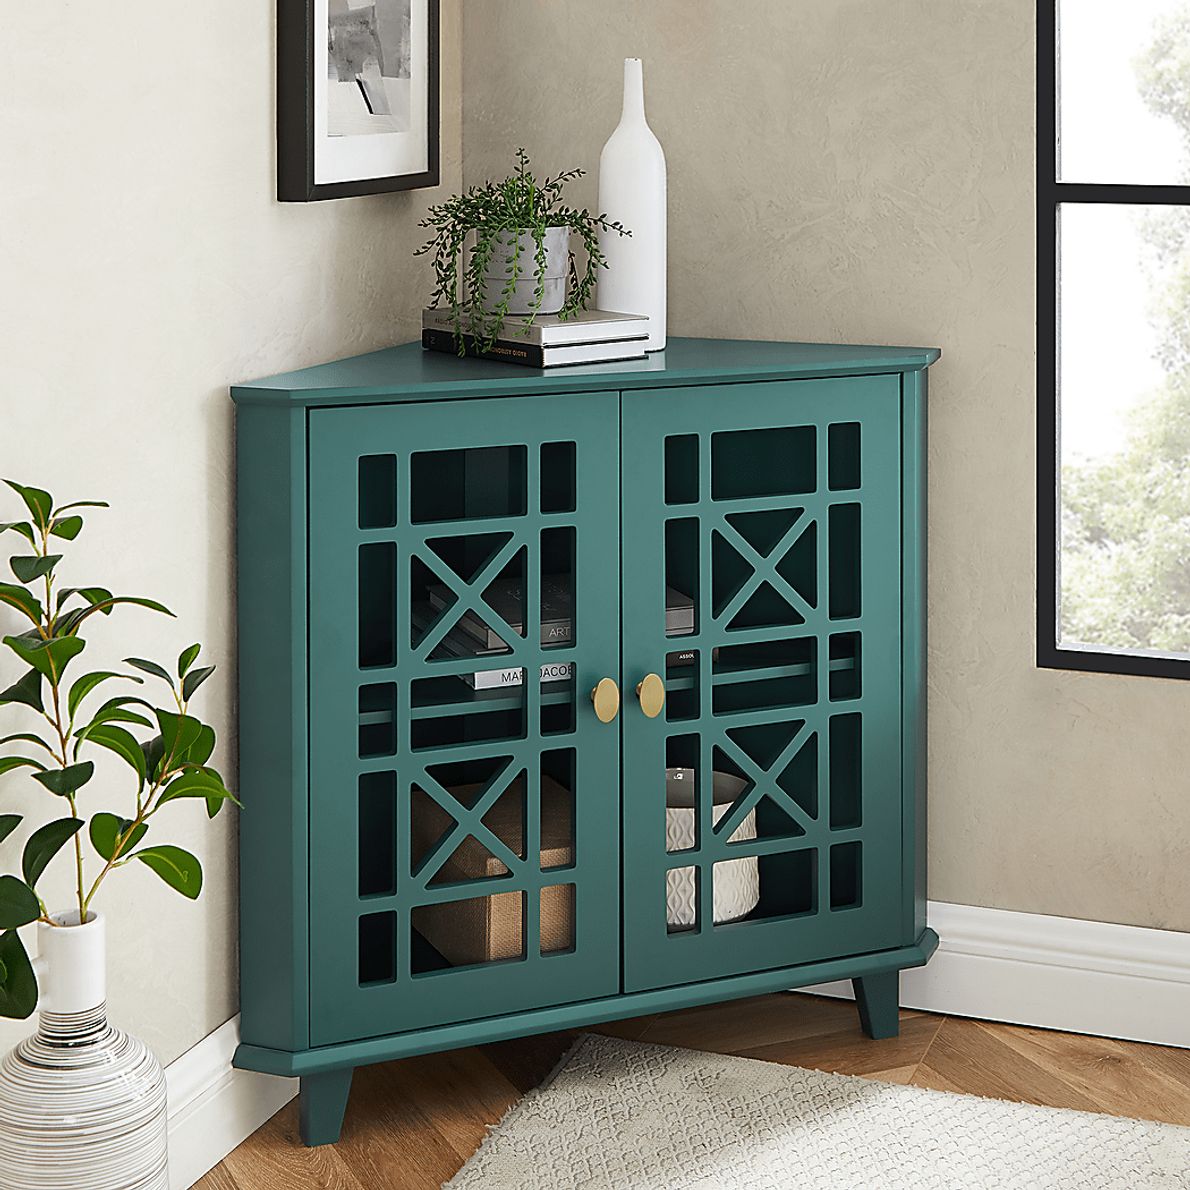 Westlyn Teal Accent Cabinet - Rooms To Go